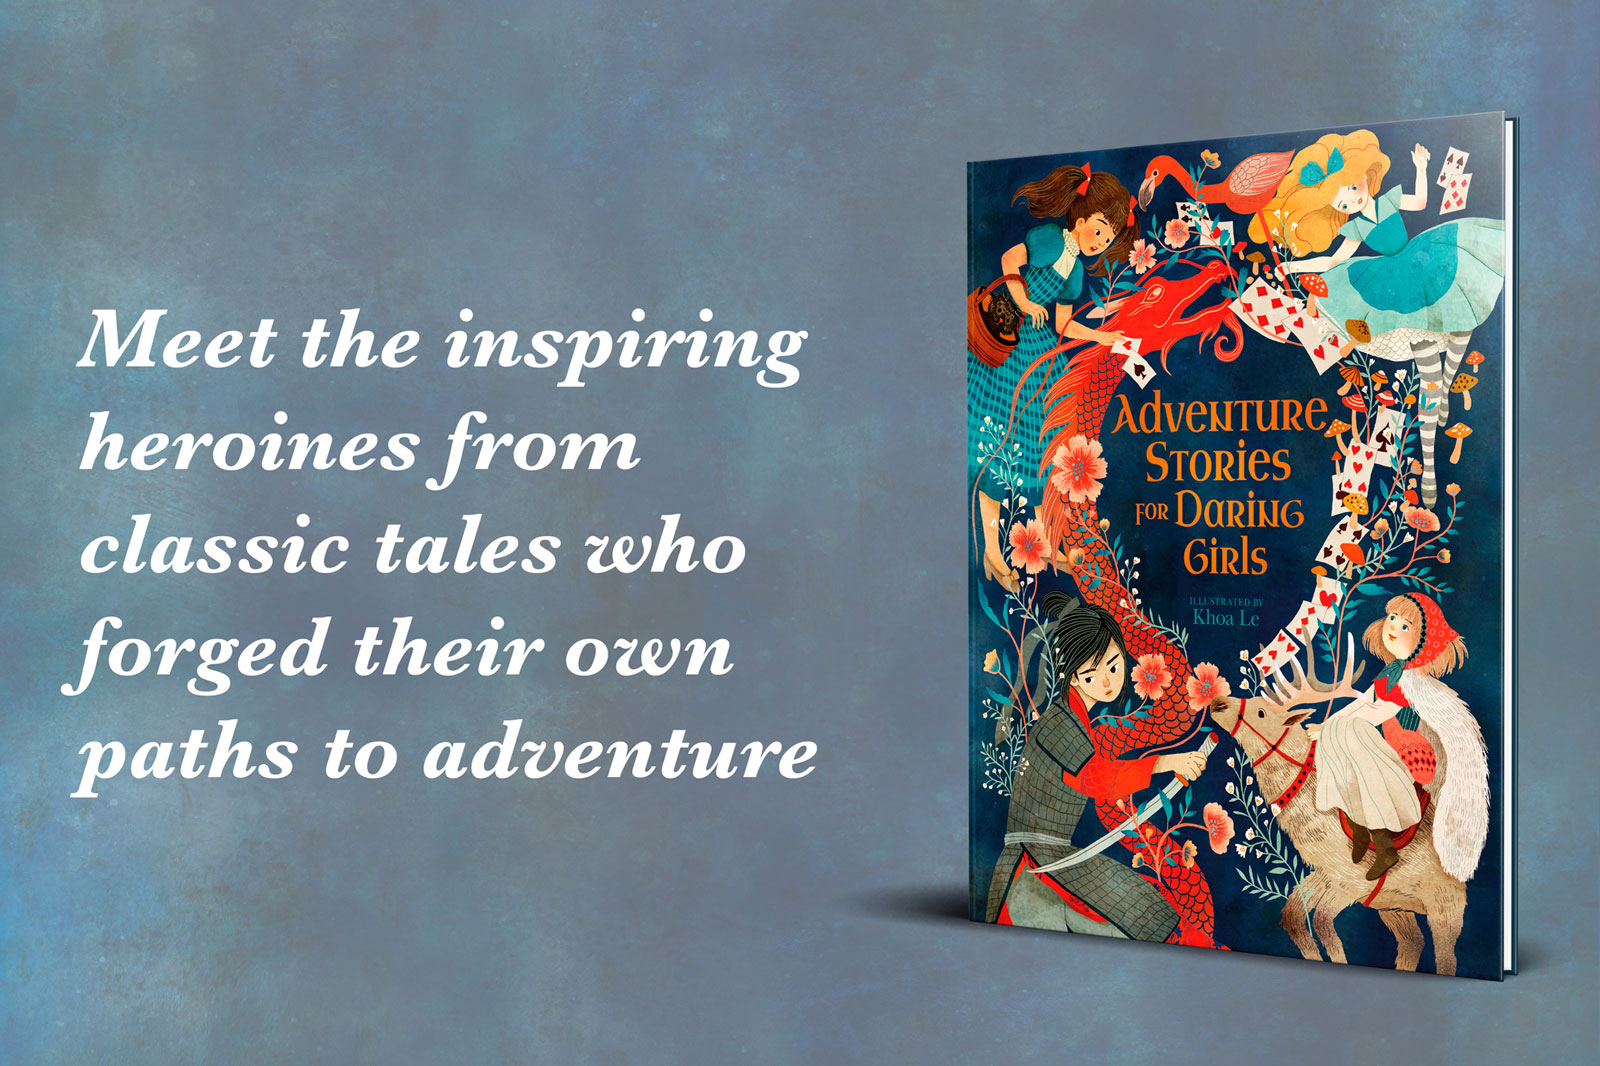 Meet the inspiring heroines from classic tales who forged their own paths to adventure